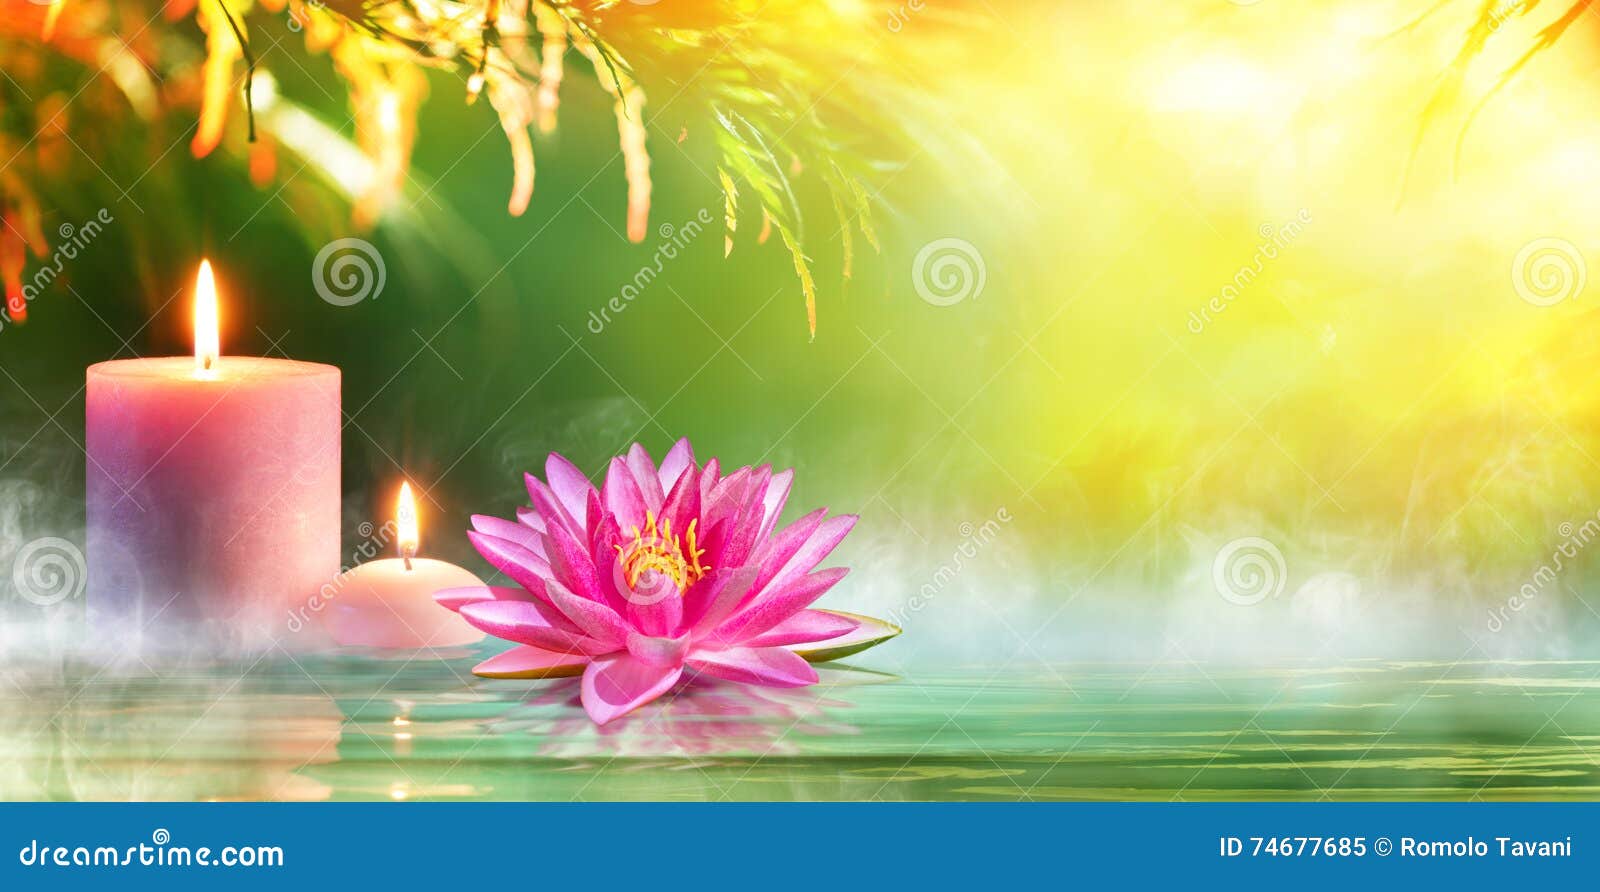 spa - serenity and meditation with candles and waterlily